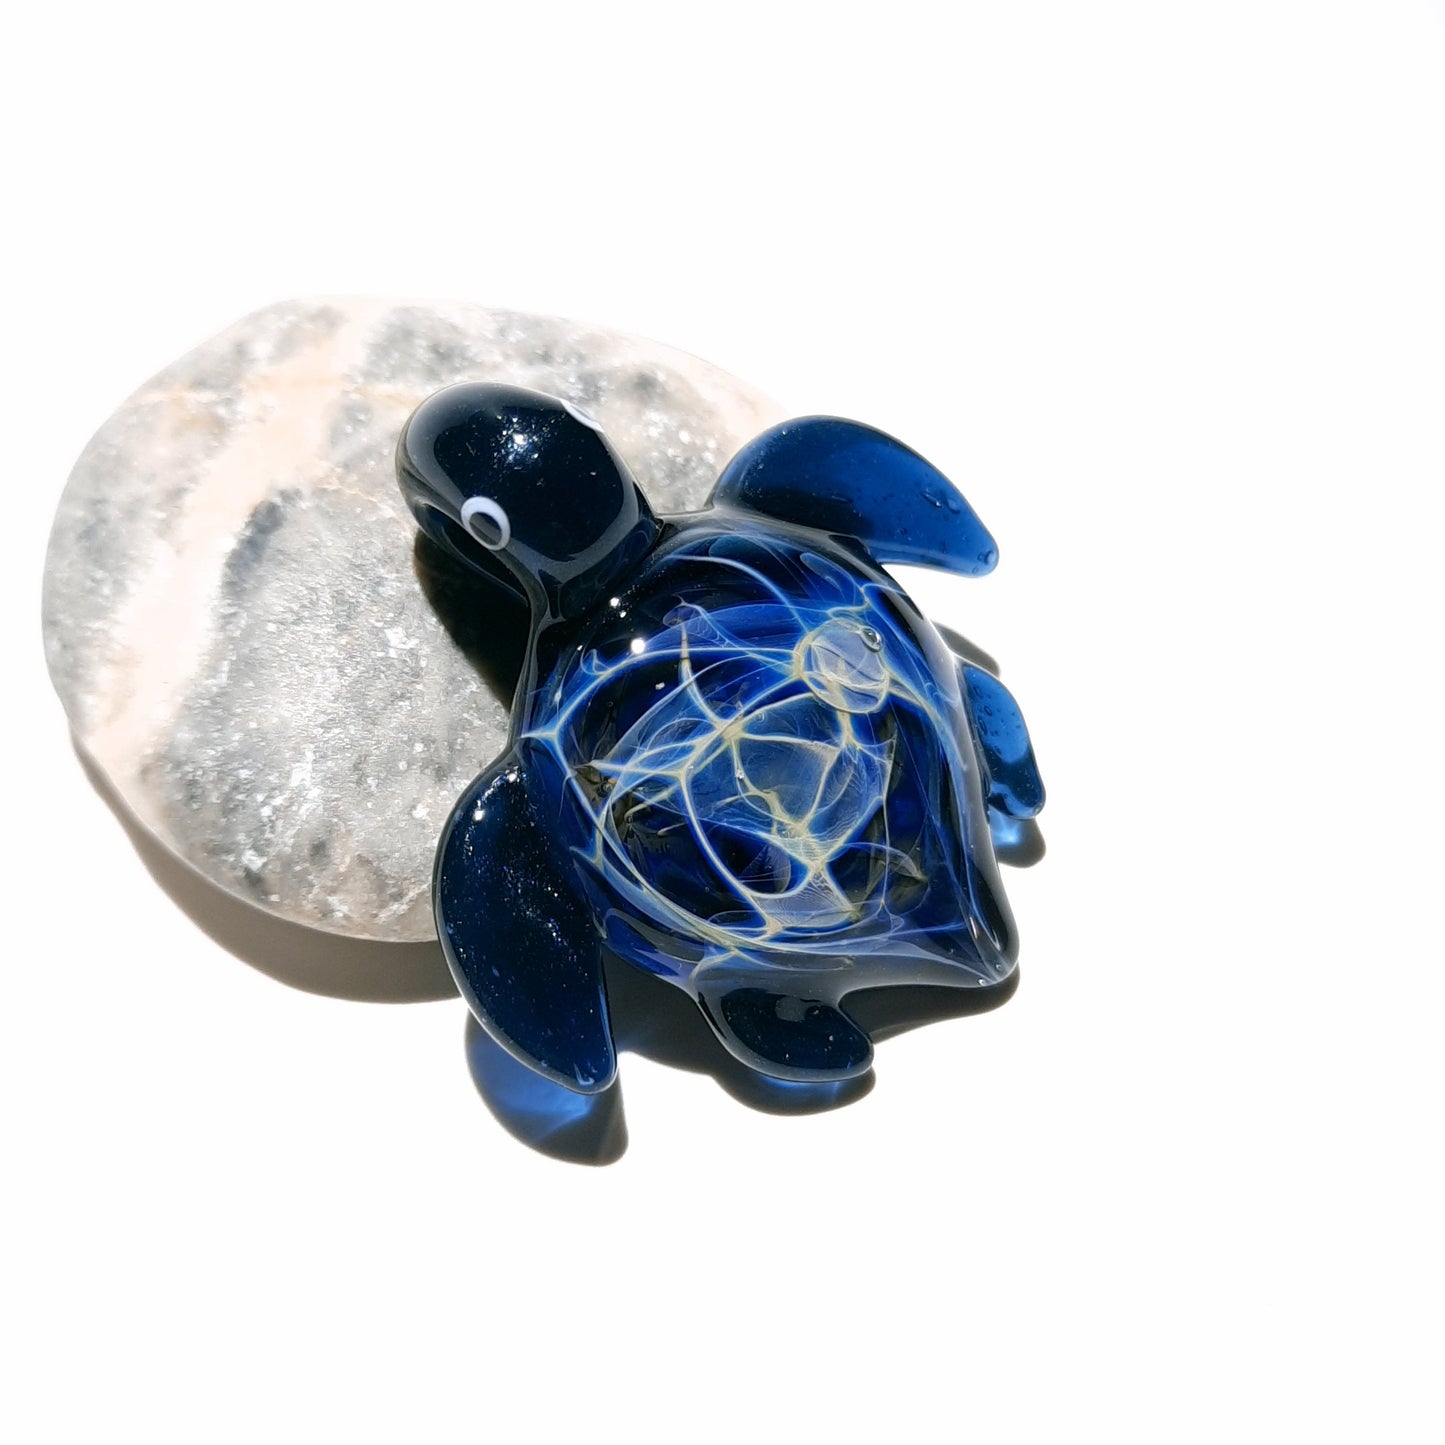 Glass Turtle - Baby Midnight Starburst Turtle Pendant - Glass Pendant - Glass Jewelry - Blown Glass - Artist Signed - Details of Silver